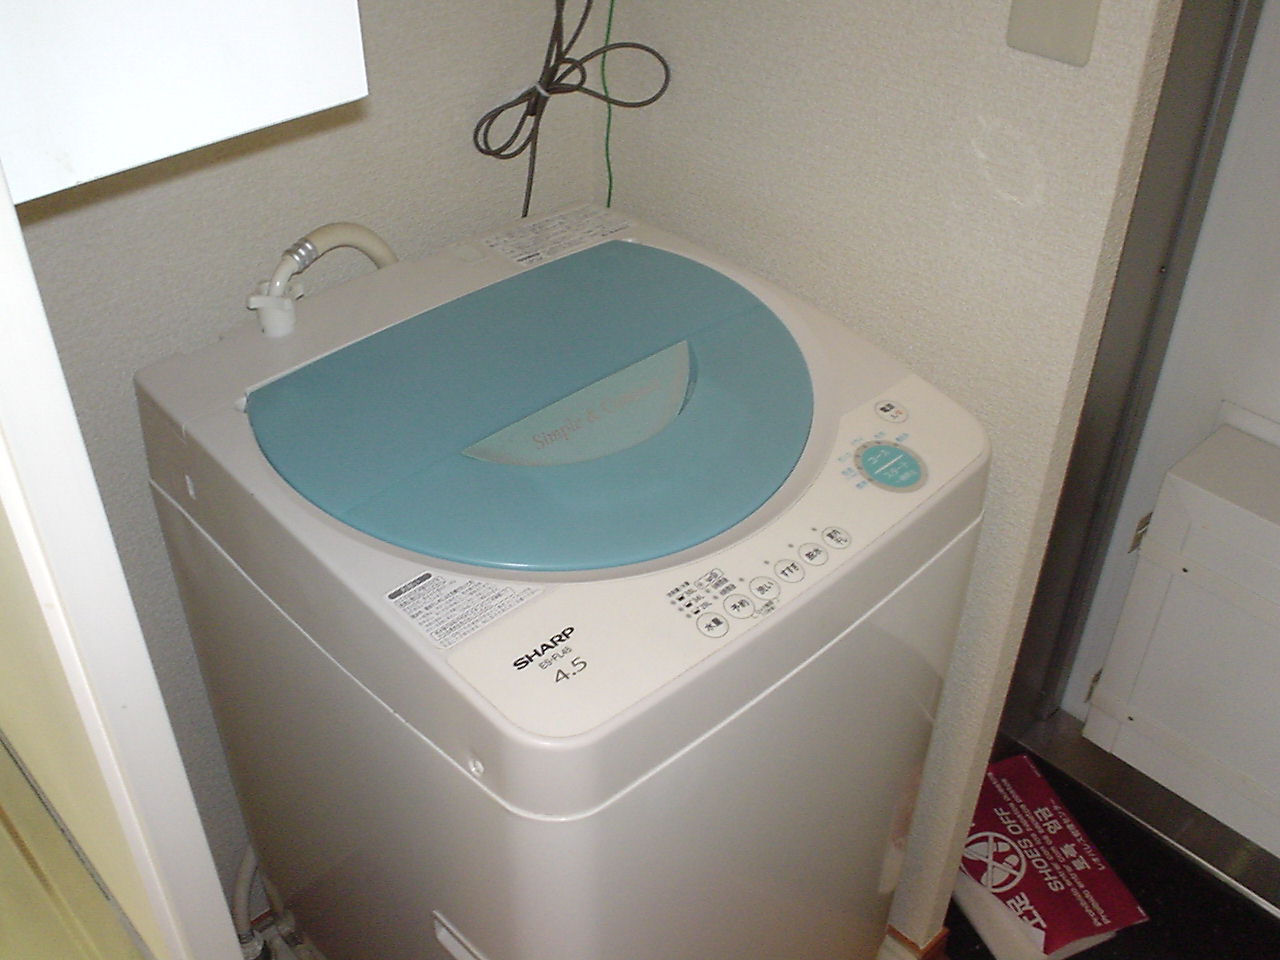 Other. It is also equipped with a washing machine. 